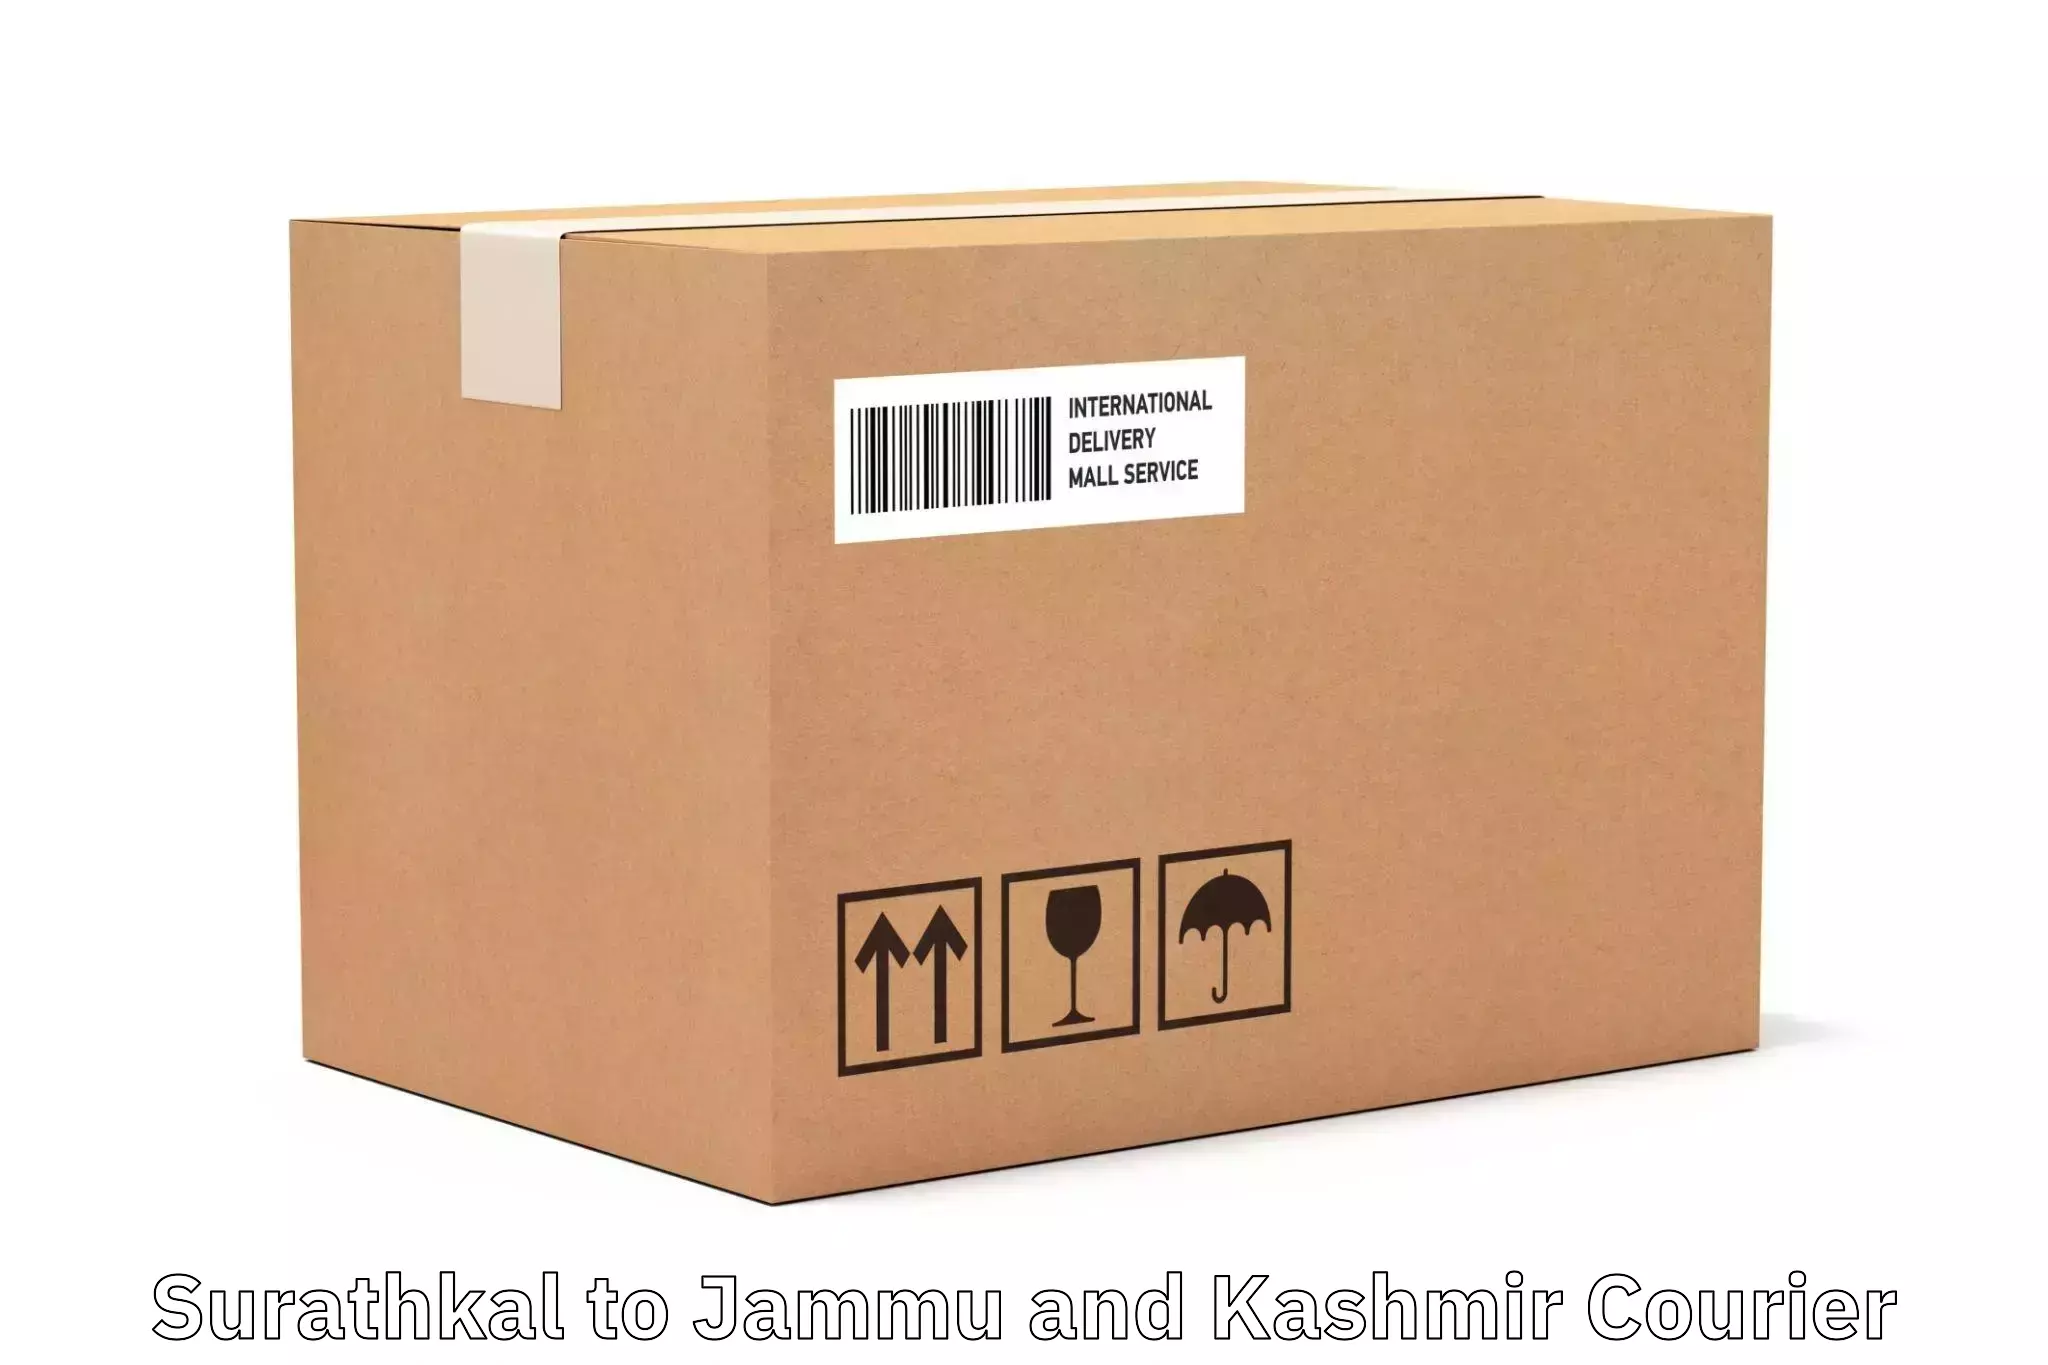 Customized delivery options Surathkal to Kargil